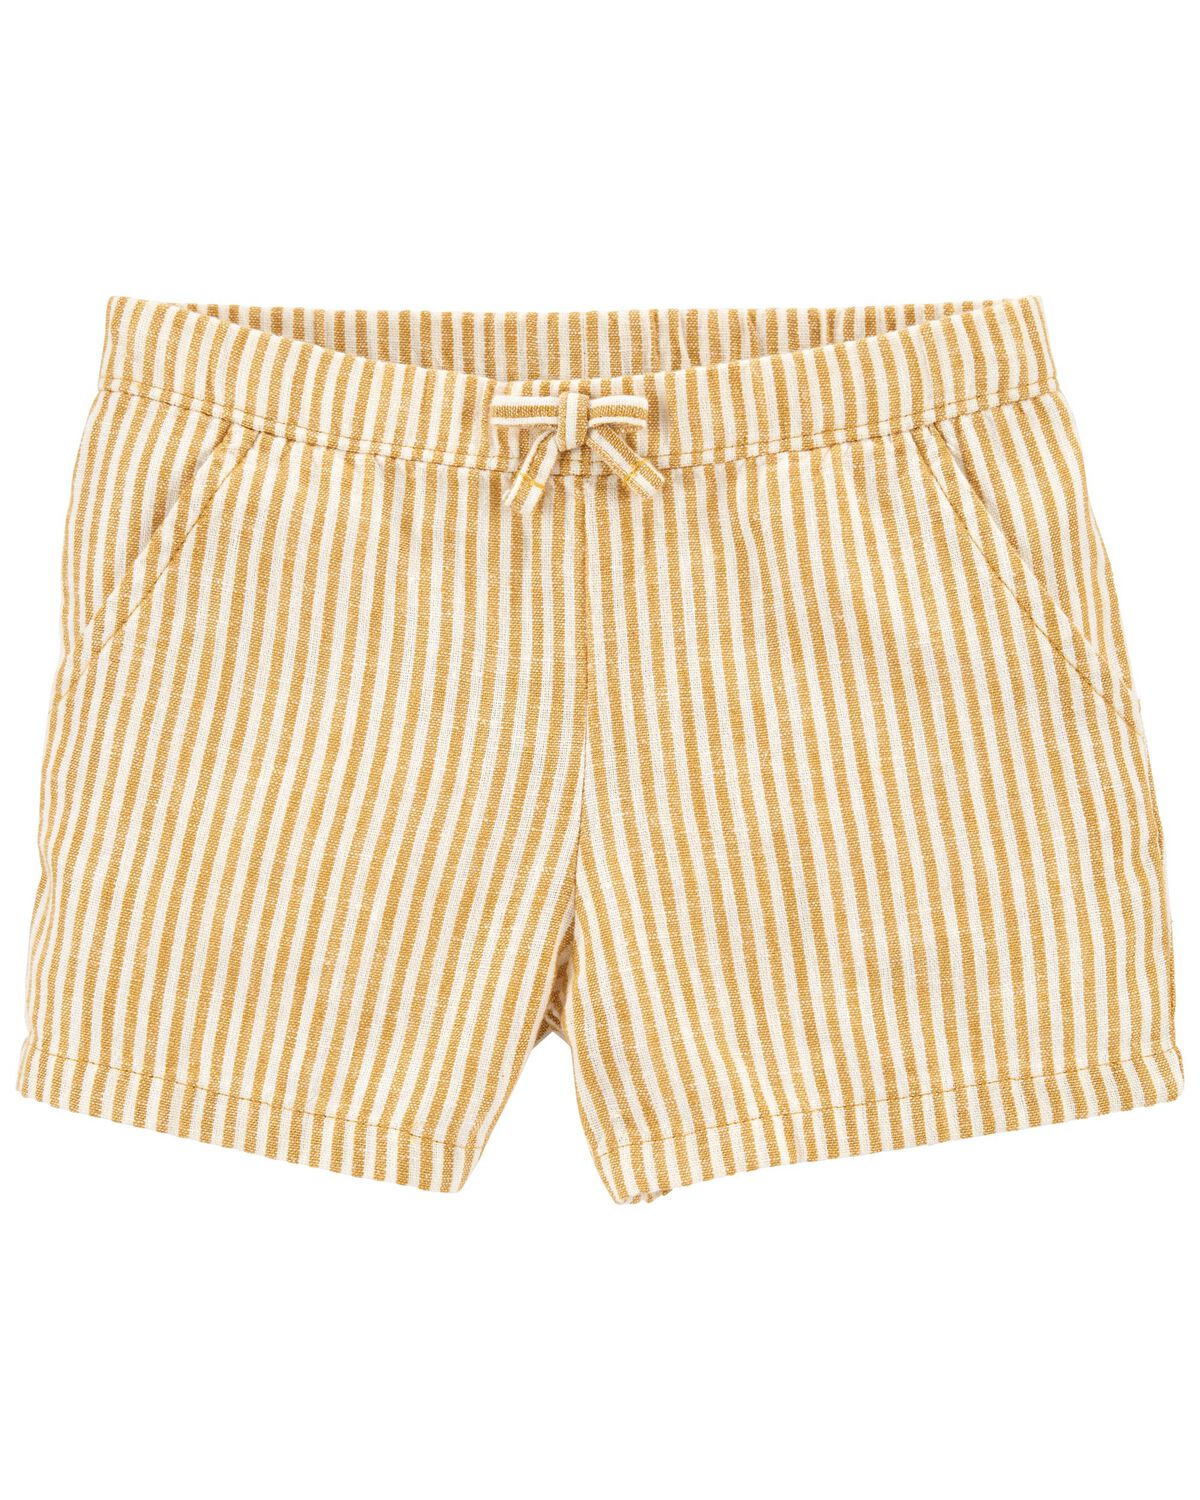 Yellow Toddler Pull-On Shorts | carters.com